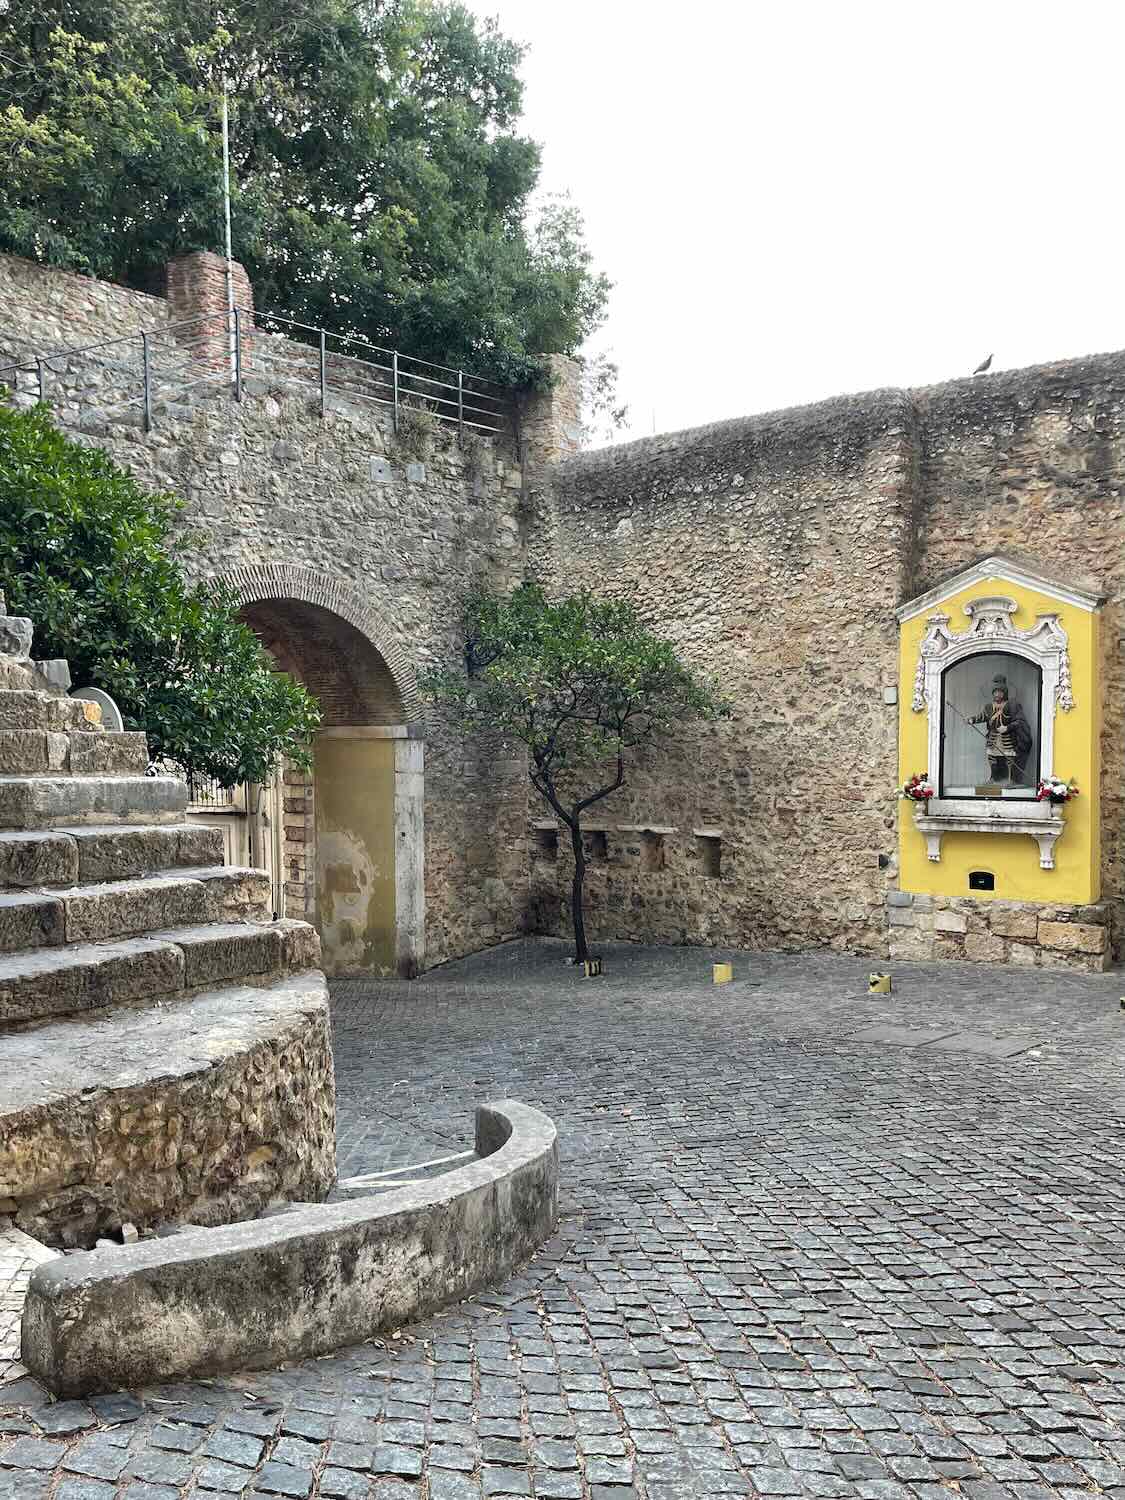 A quiet courtyard with a cobblestone pathway leading to a small, ornate shrine built into the yellow walls of Lisbon's Castle.